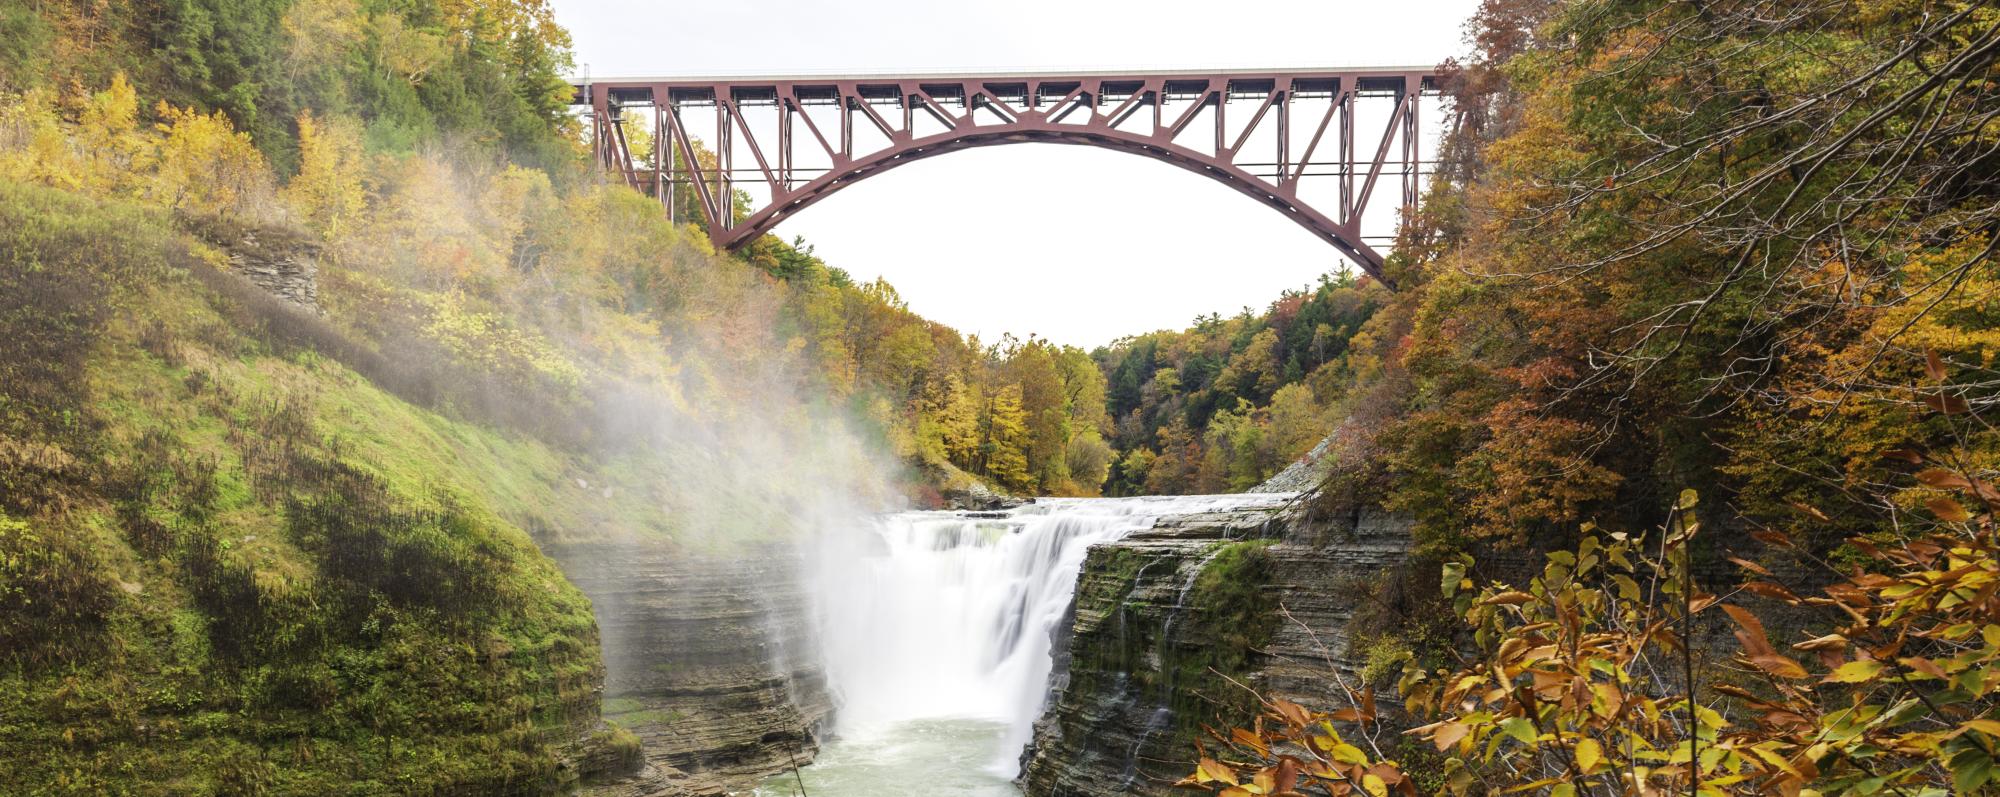 Letchworth State Park view of fall foliage